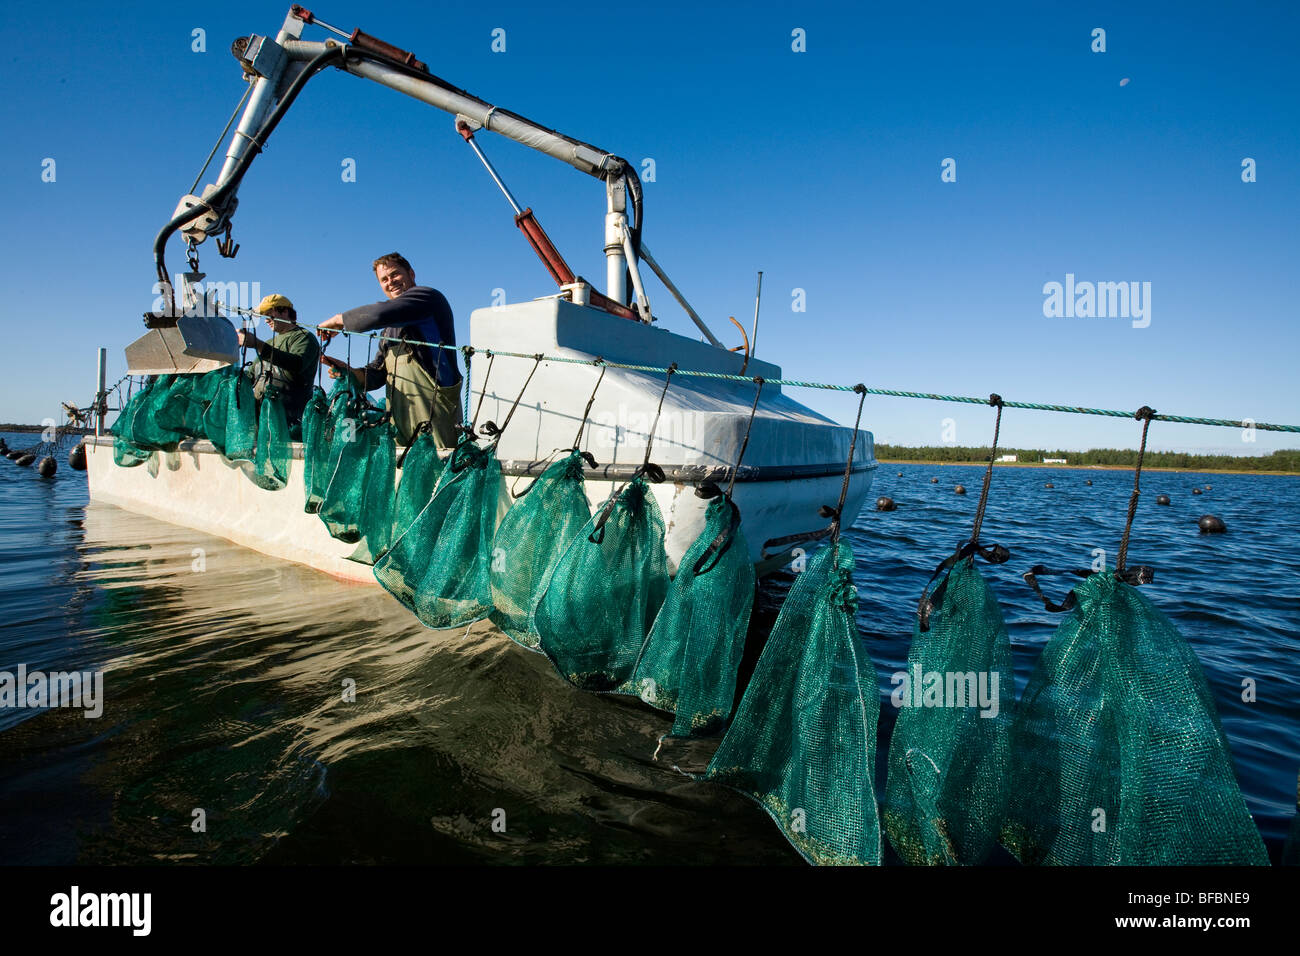 workers tie mesh bags of oysters to lines, East Bideford, Malpeque Bay, Prince Edward Island, Canada Stock Photo